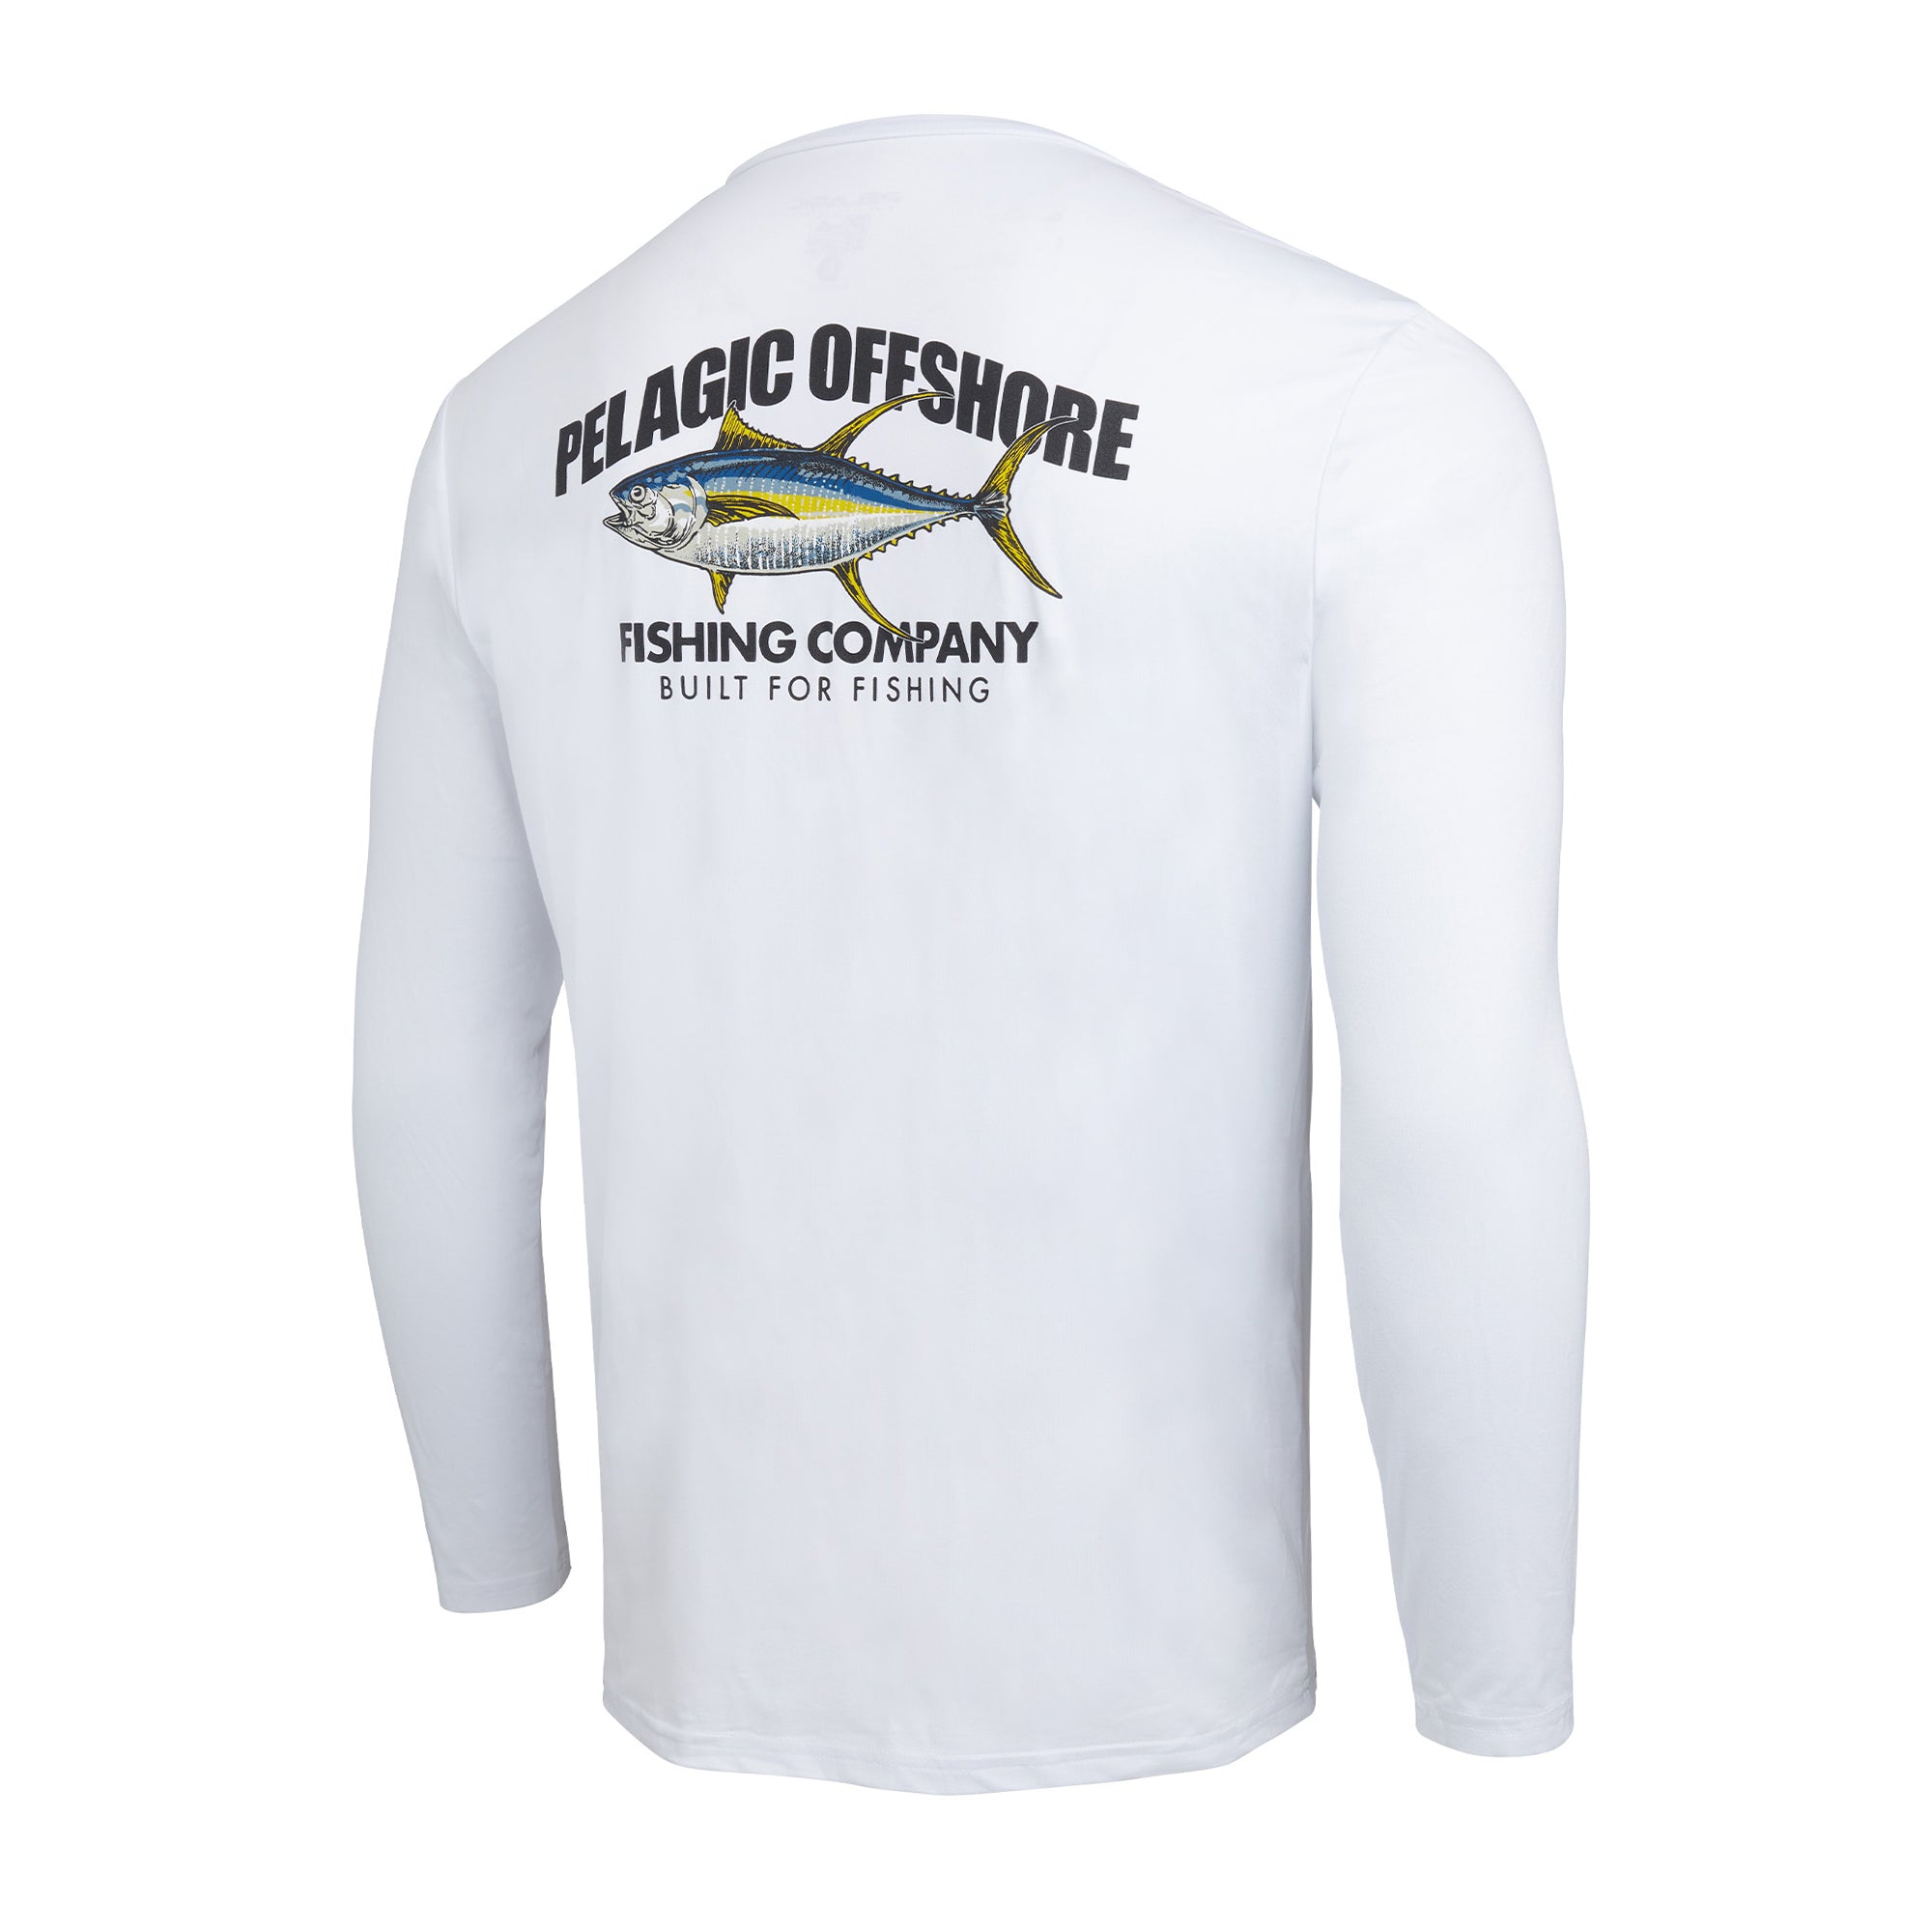 Performance Fishing Clothing  Pelagic Gear® Official Site